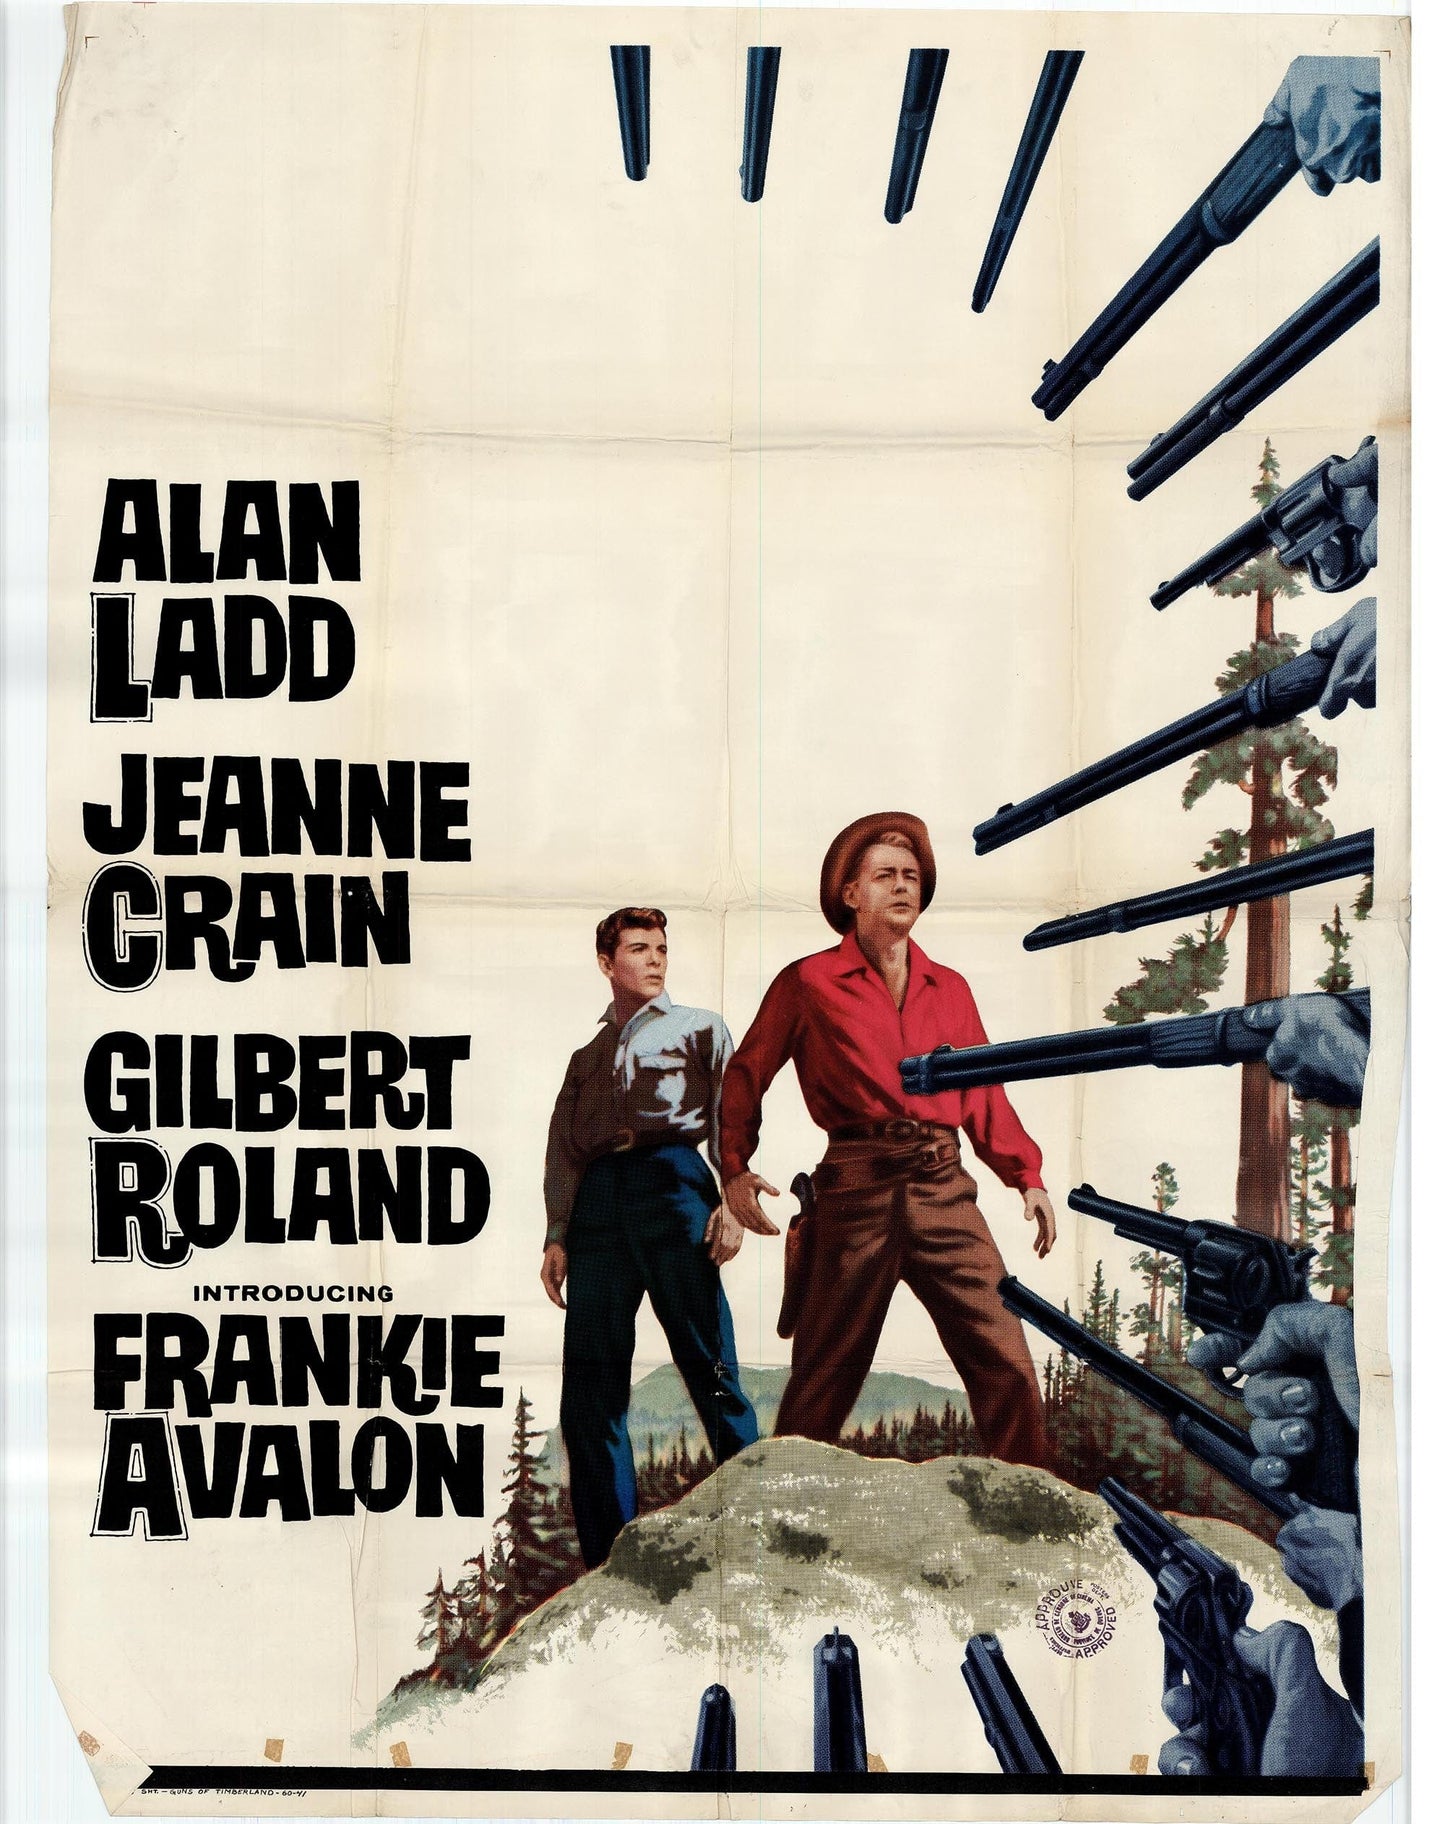 Guns of the Timberland - Classic Movie Poster